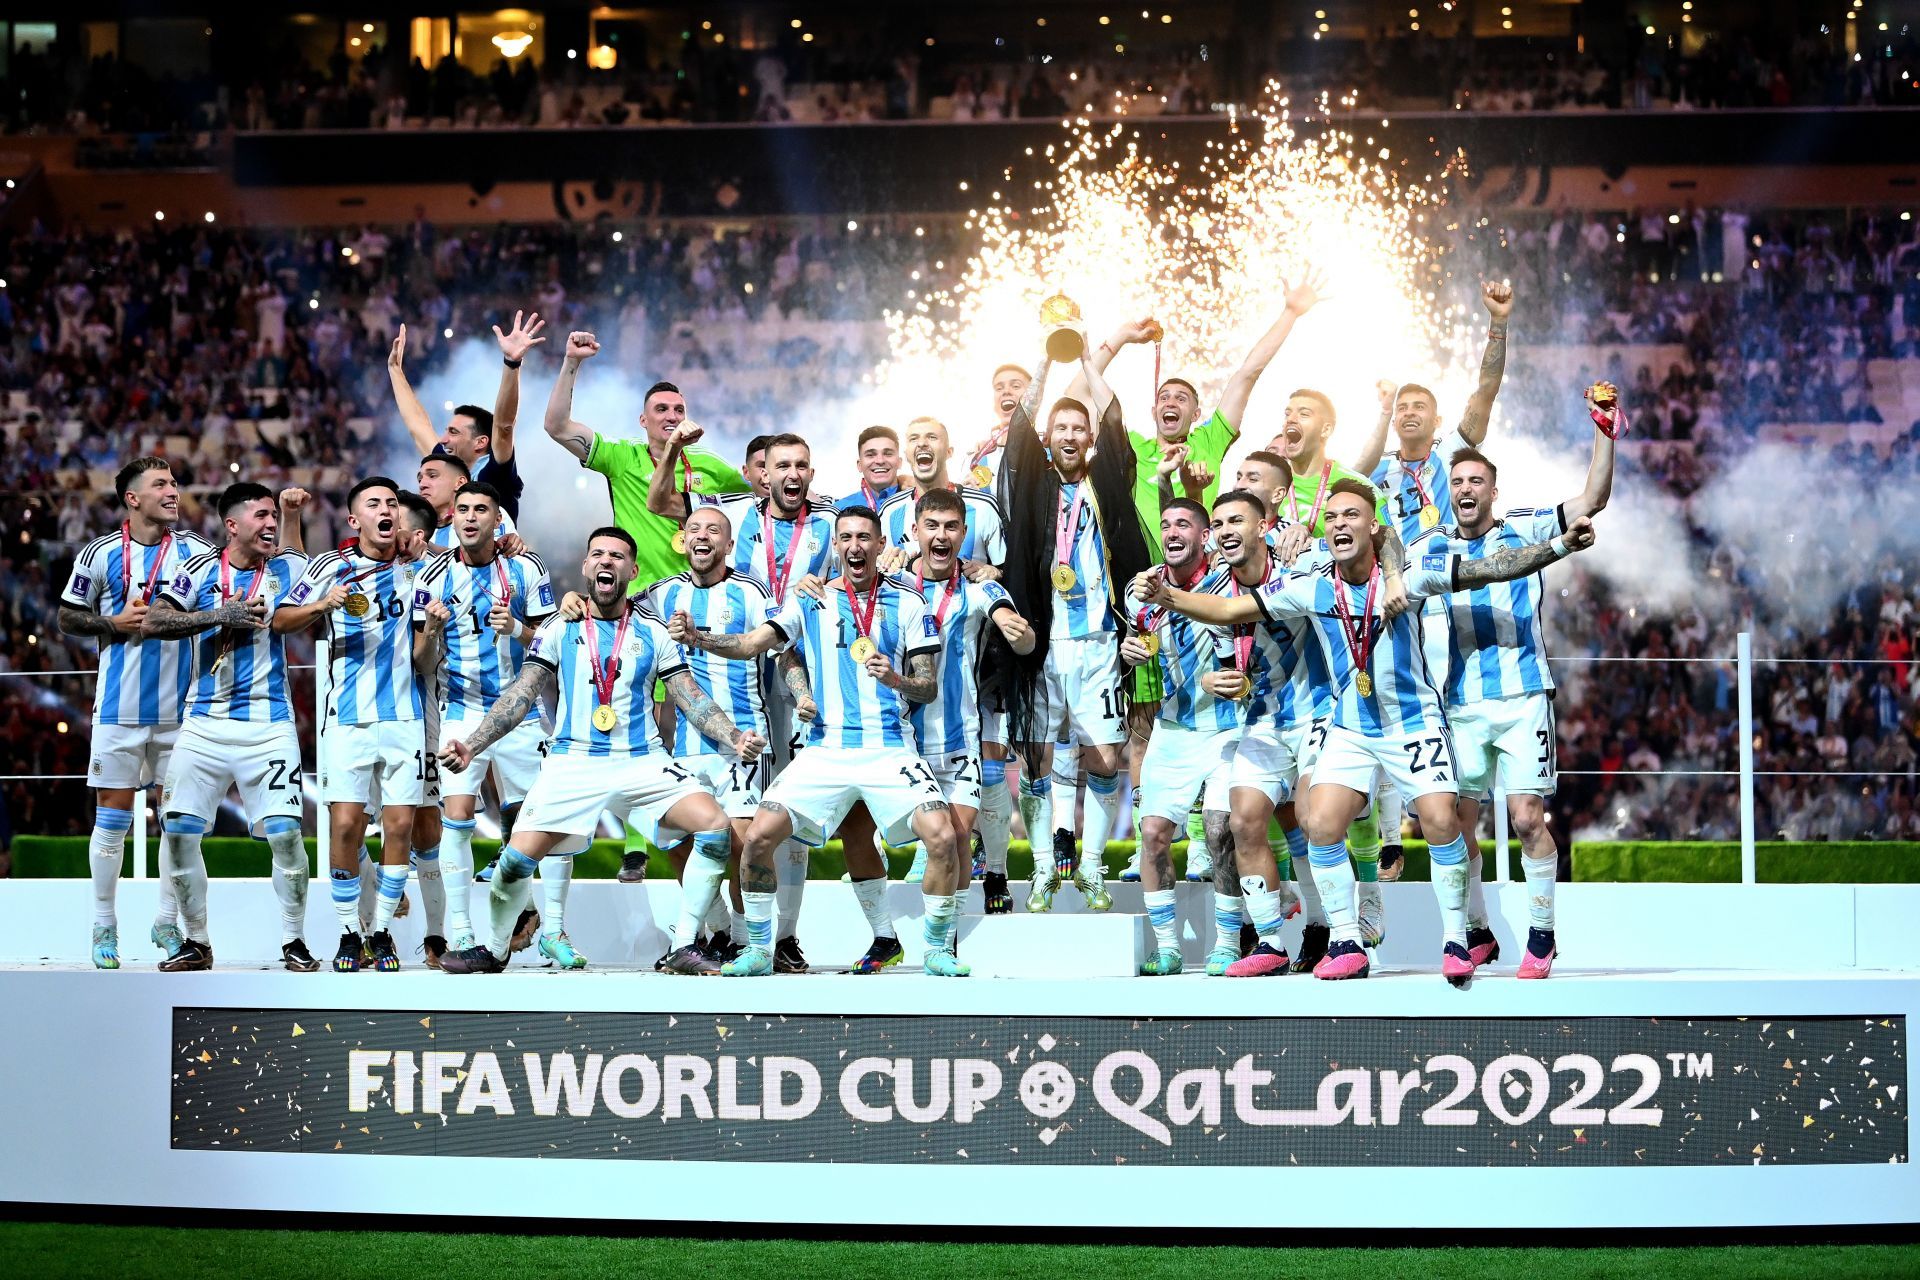 Argentina celebrate the defining moment of a controversial World Cup.